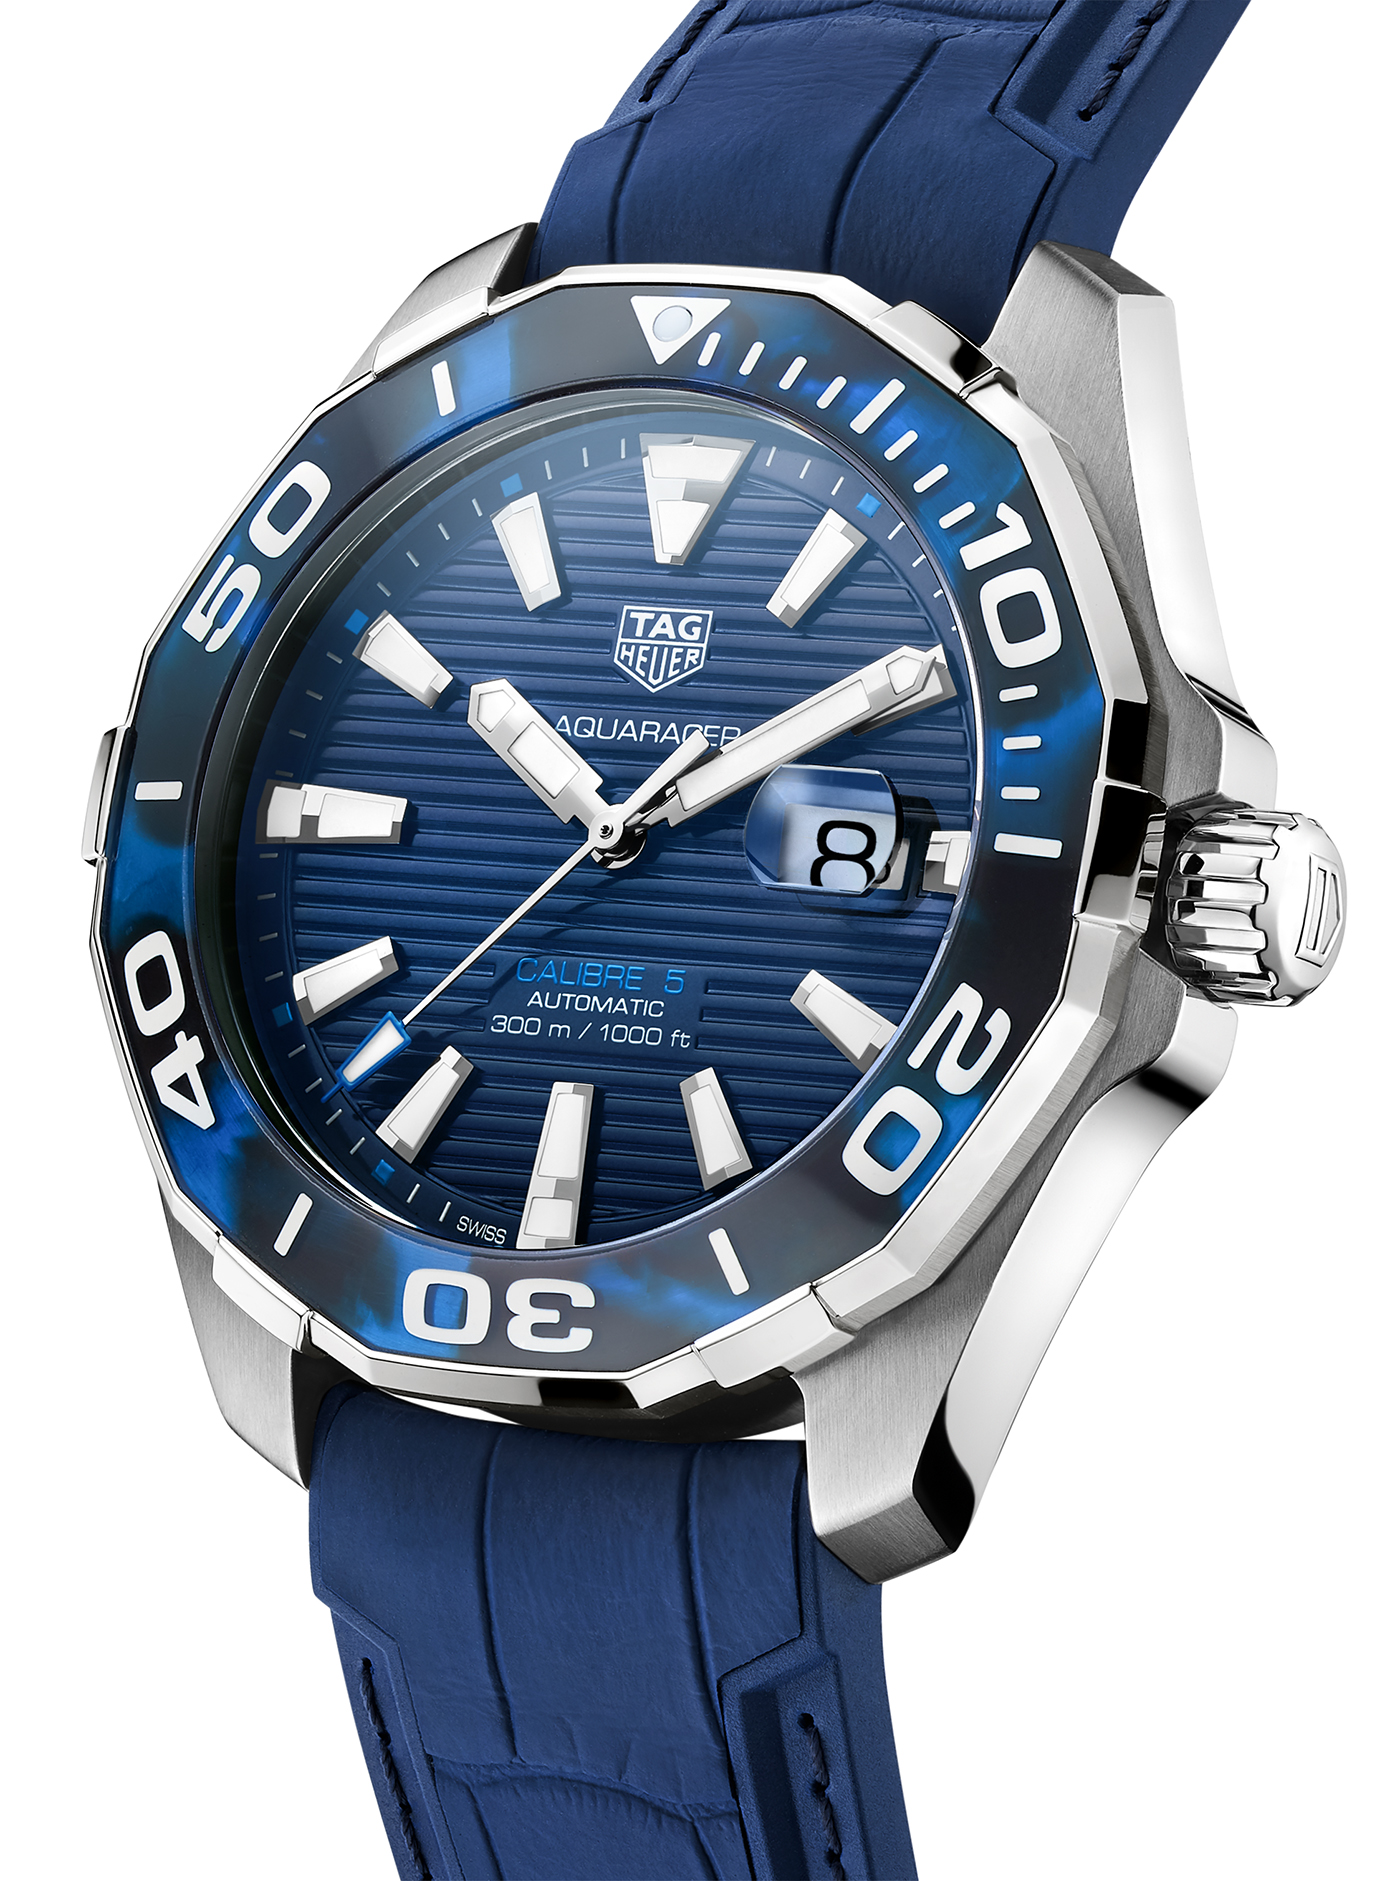 TAG Heuer Announces New Special Edition Aquaracer Models With Tortoise Shell Inspired Bezels Watch Releases 